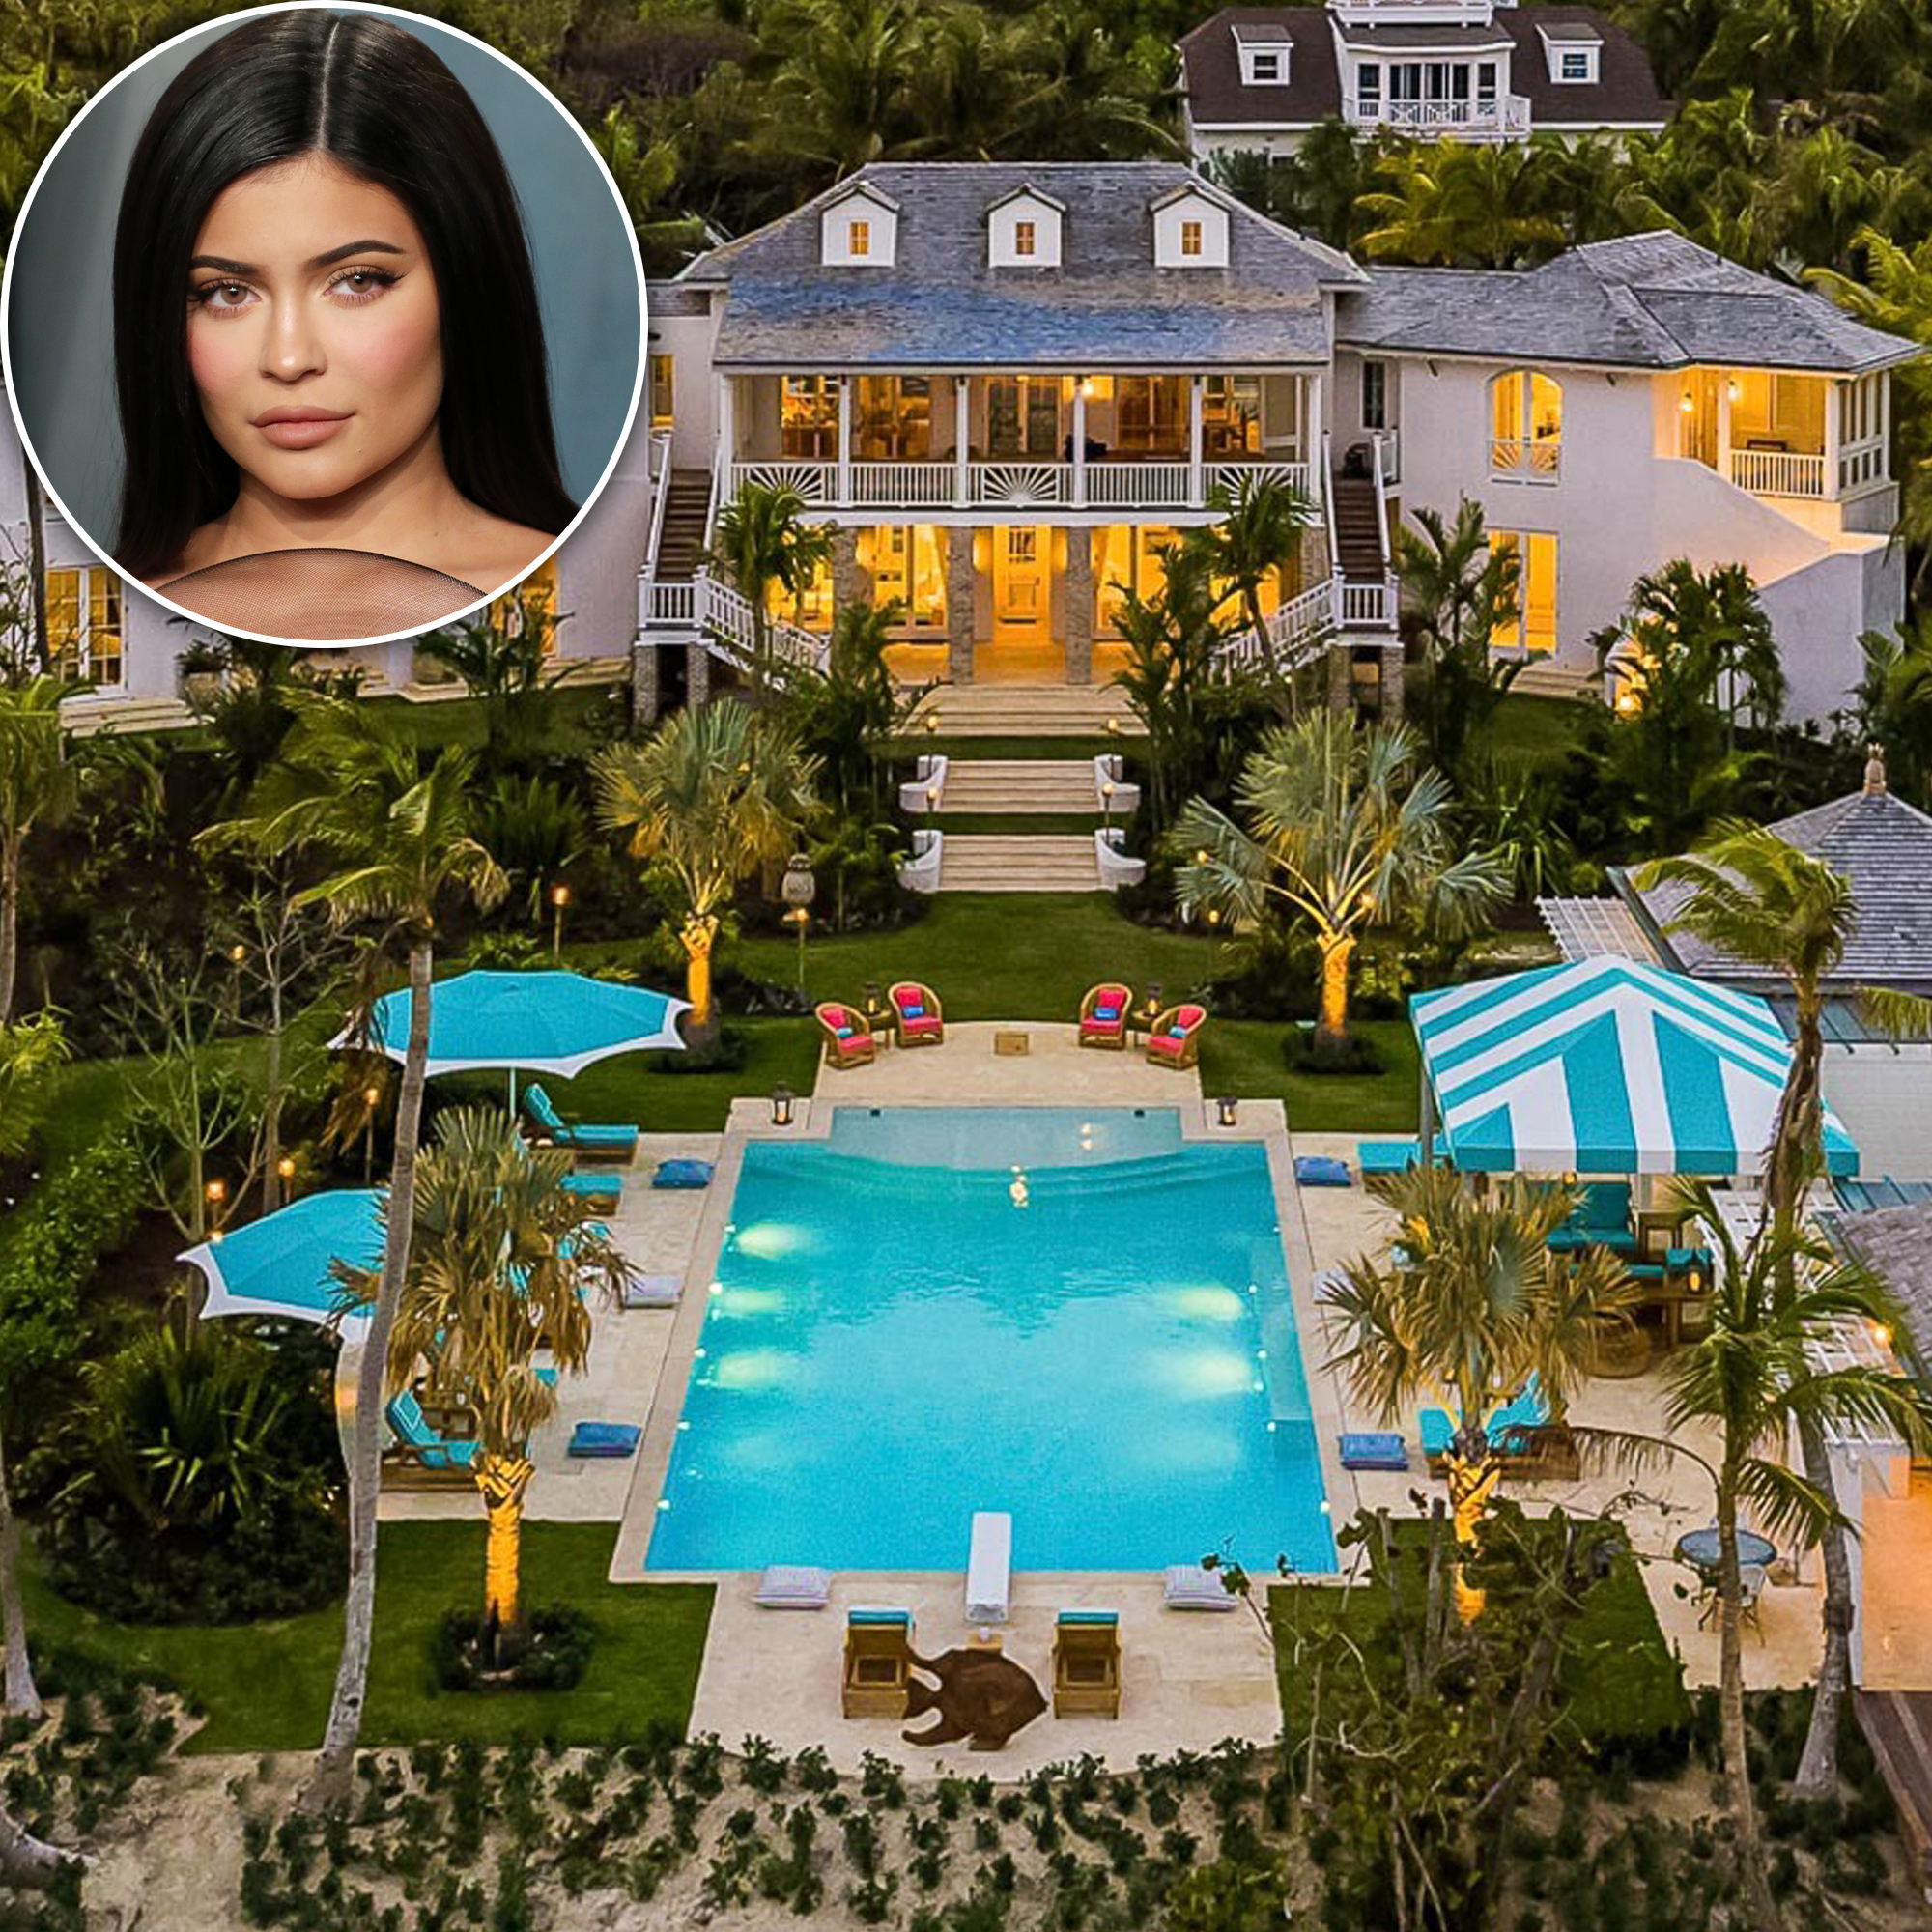 Fans Say Kylie Jenner's New House 'Looks Like a Costco